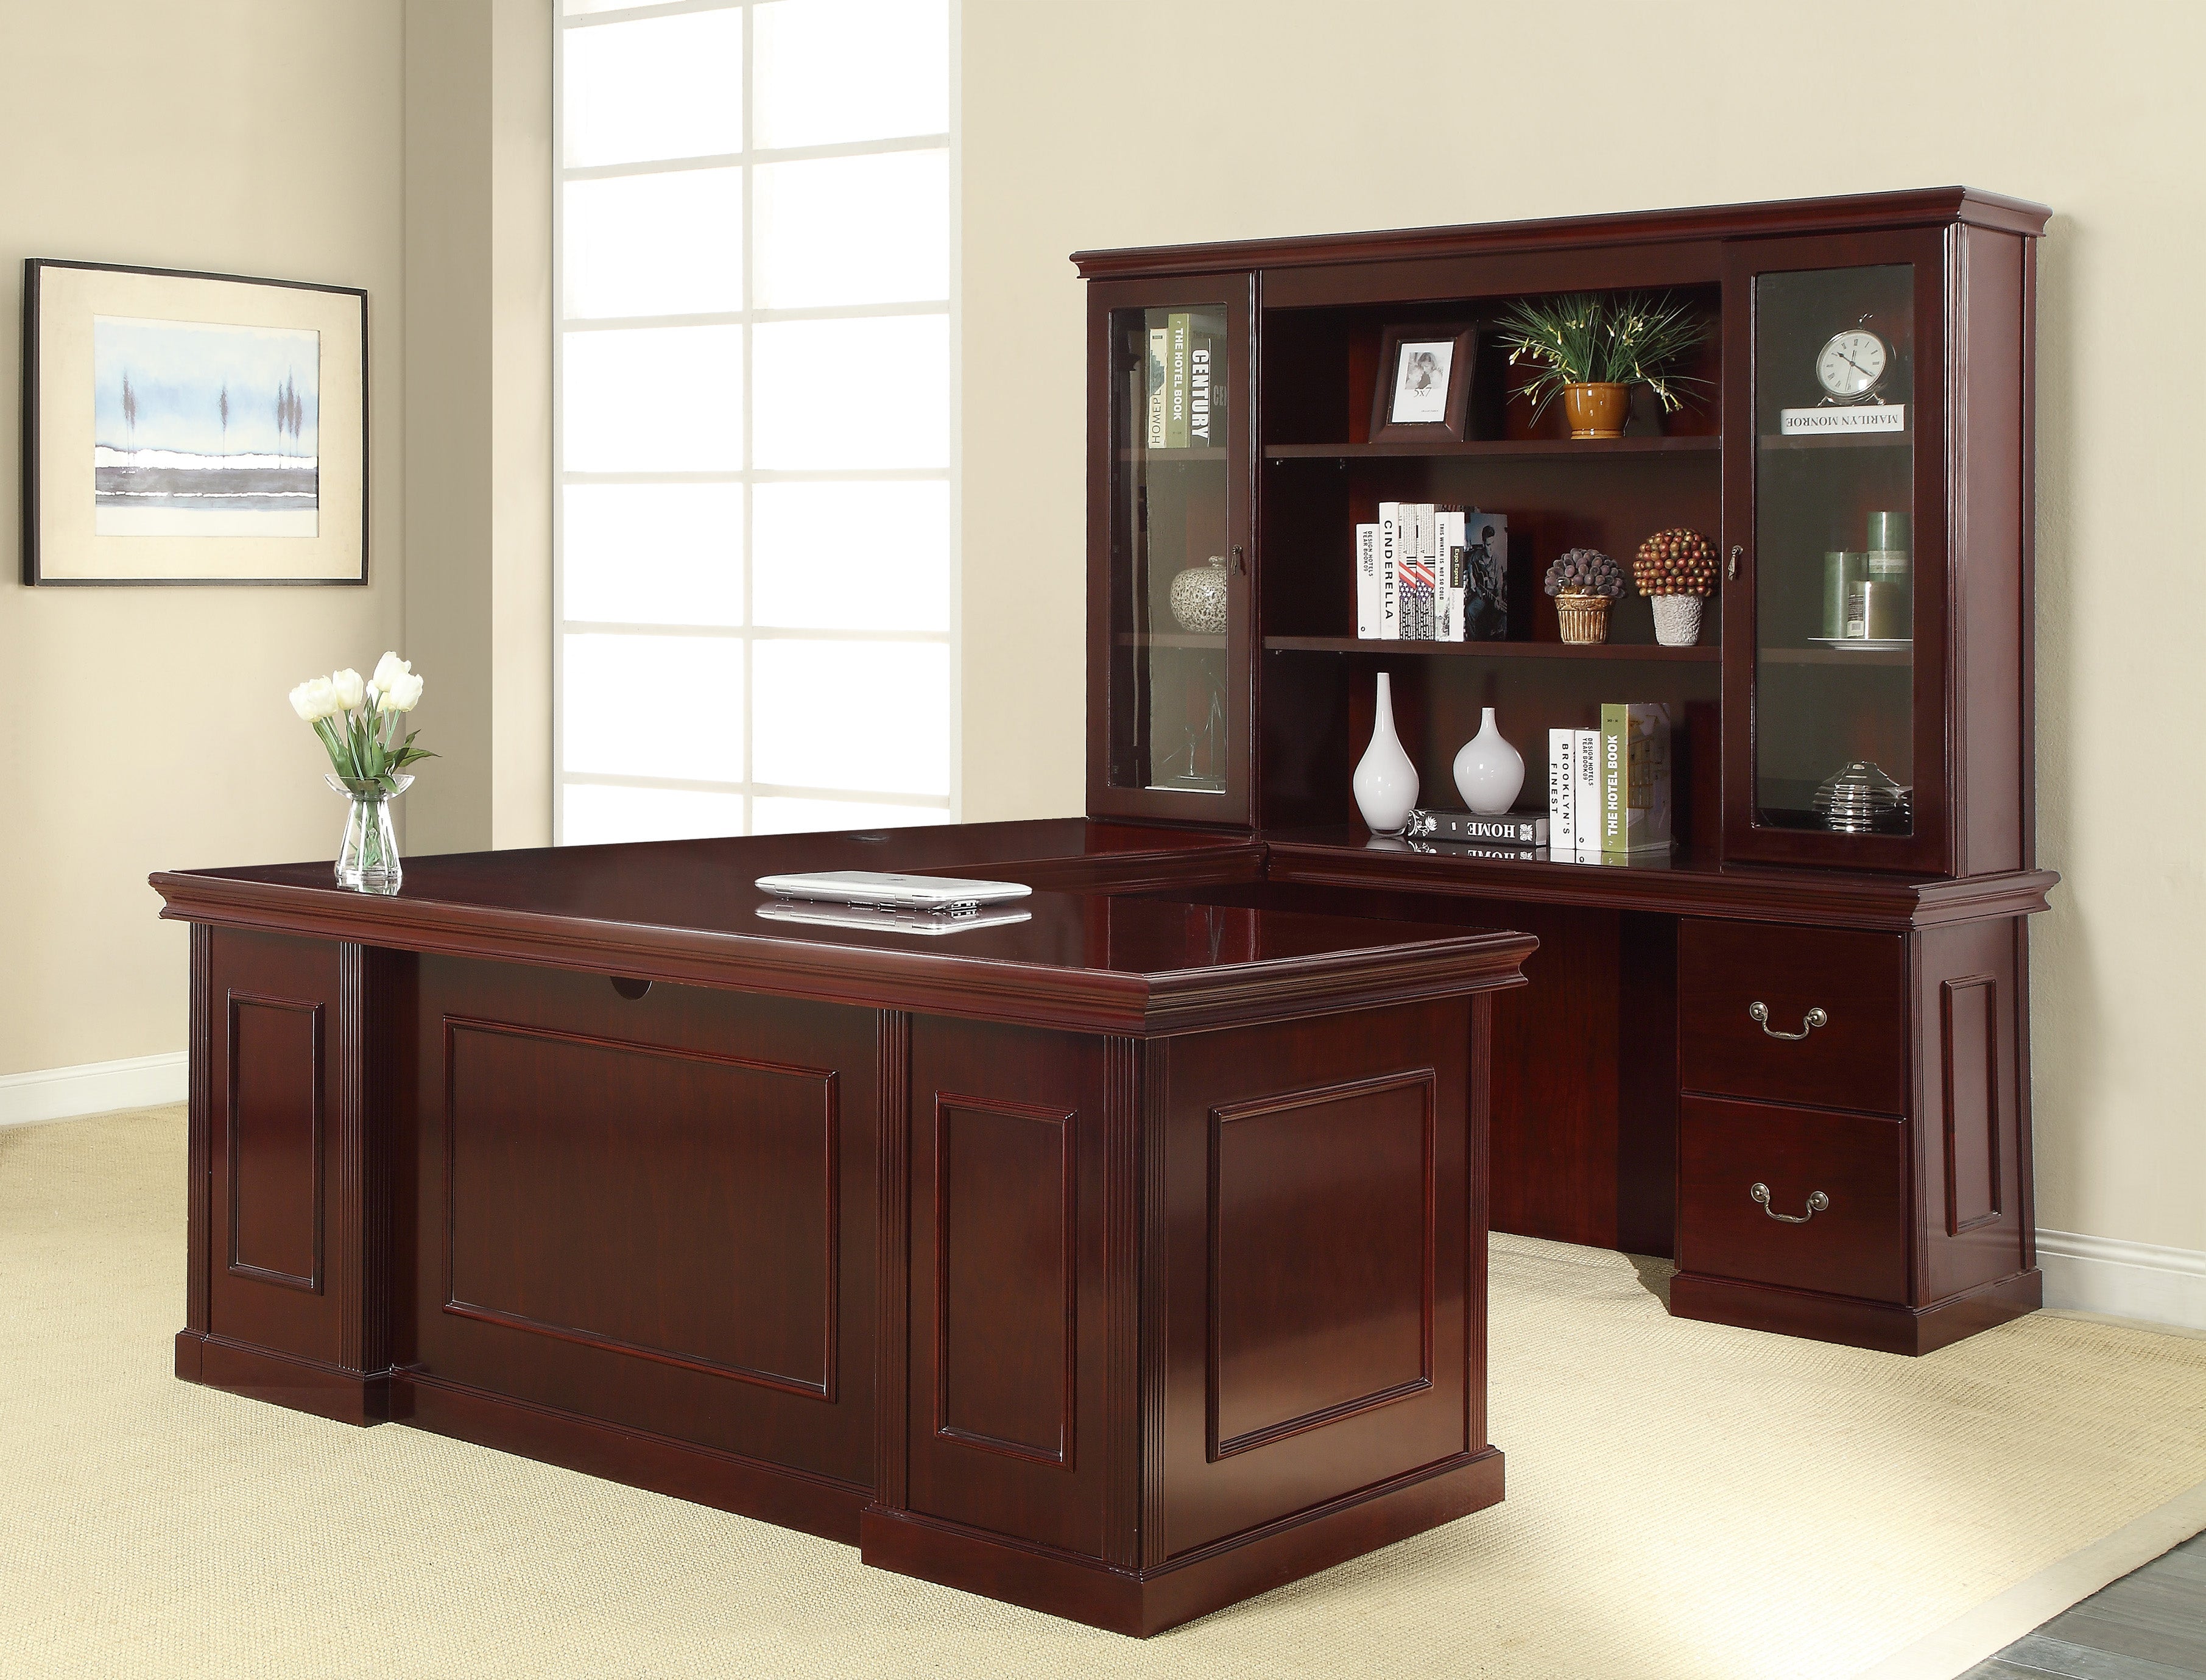 TOW-TYP12 - Townsend Series Traditional Executive 'U' Shape Desk w/Hutch by Office Star